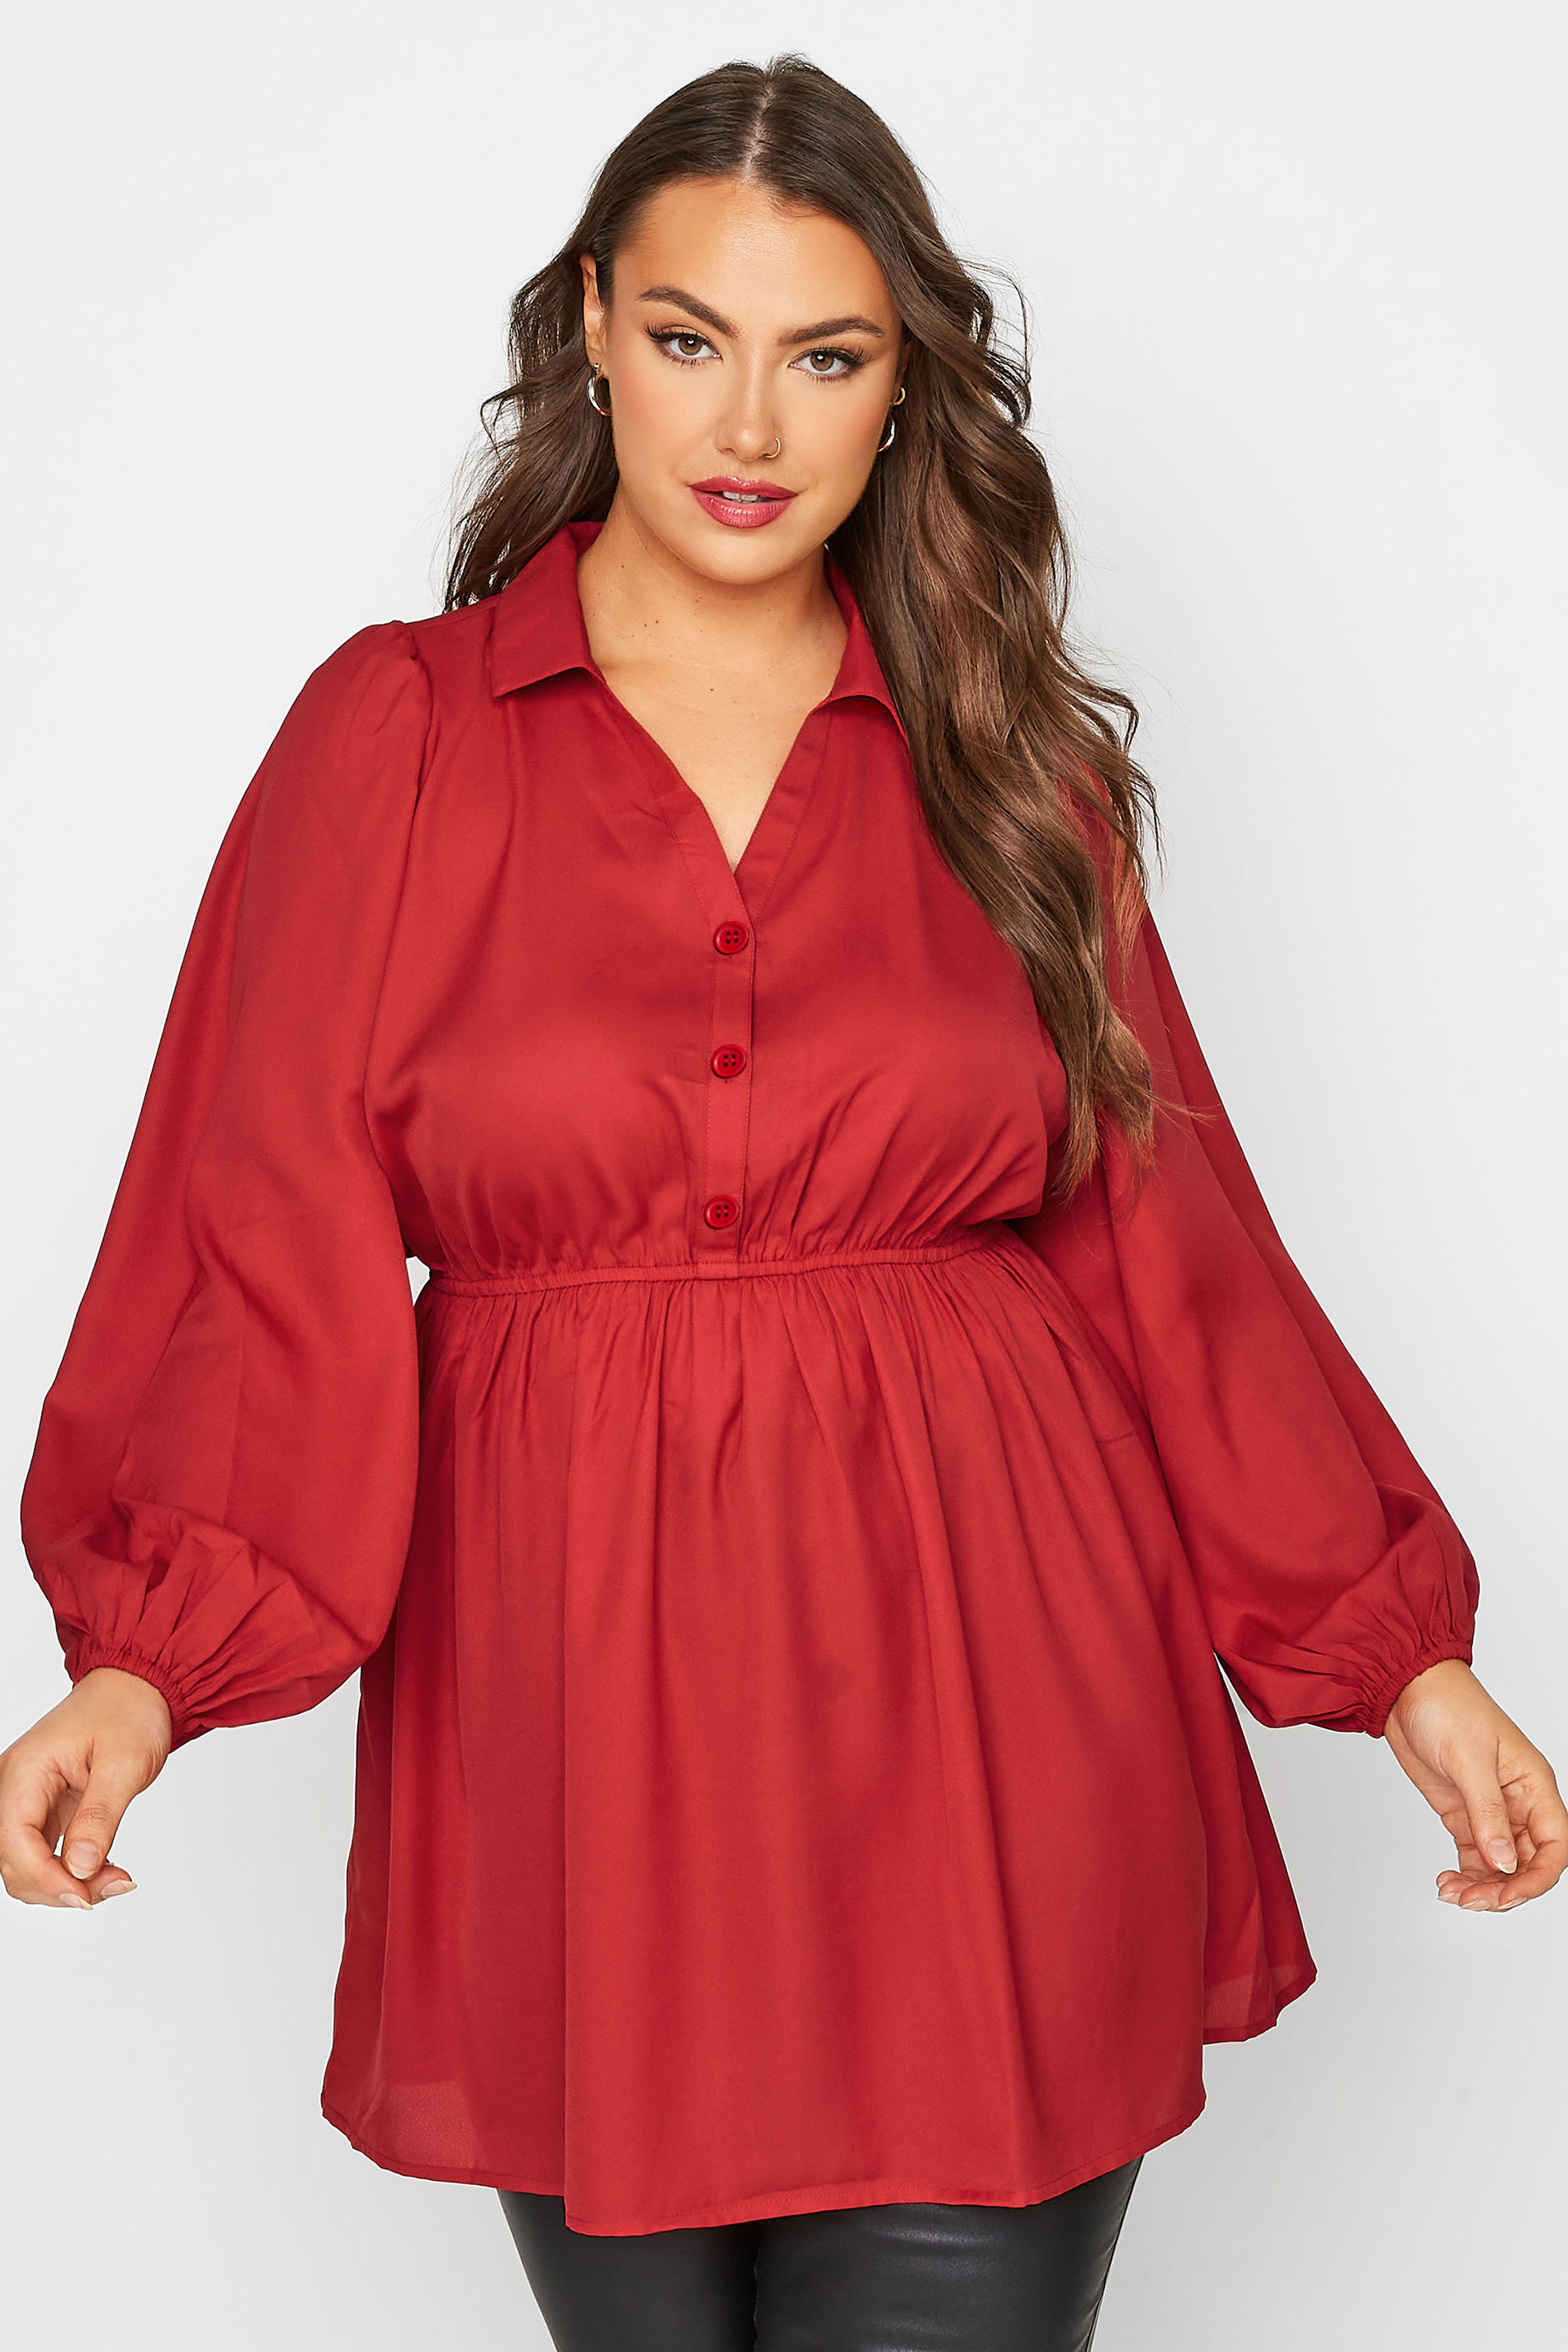 LIMITED COLLECTION Plus Size Red Peplum Rugby Shirt | Yours Clothings 1